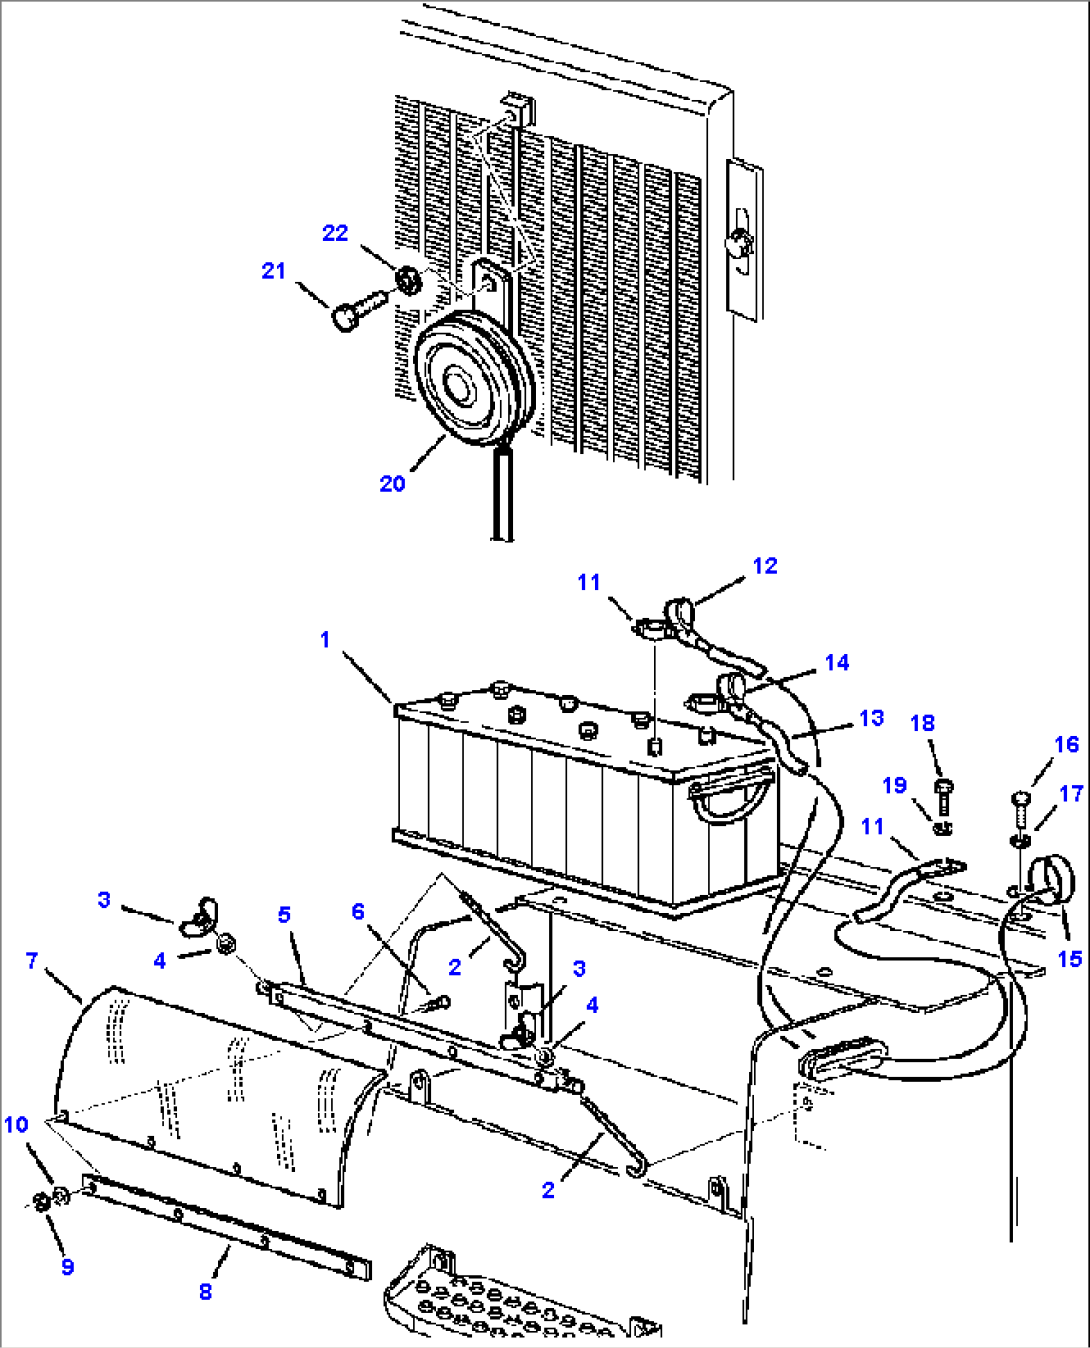 FIG. E1500-01B2 ELECTRICAL SYSTEM - BATTERY AND FRONT HORN